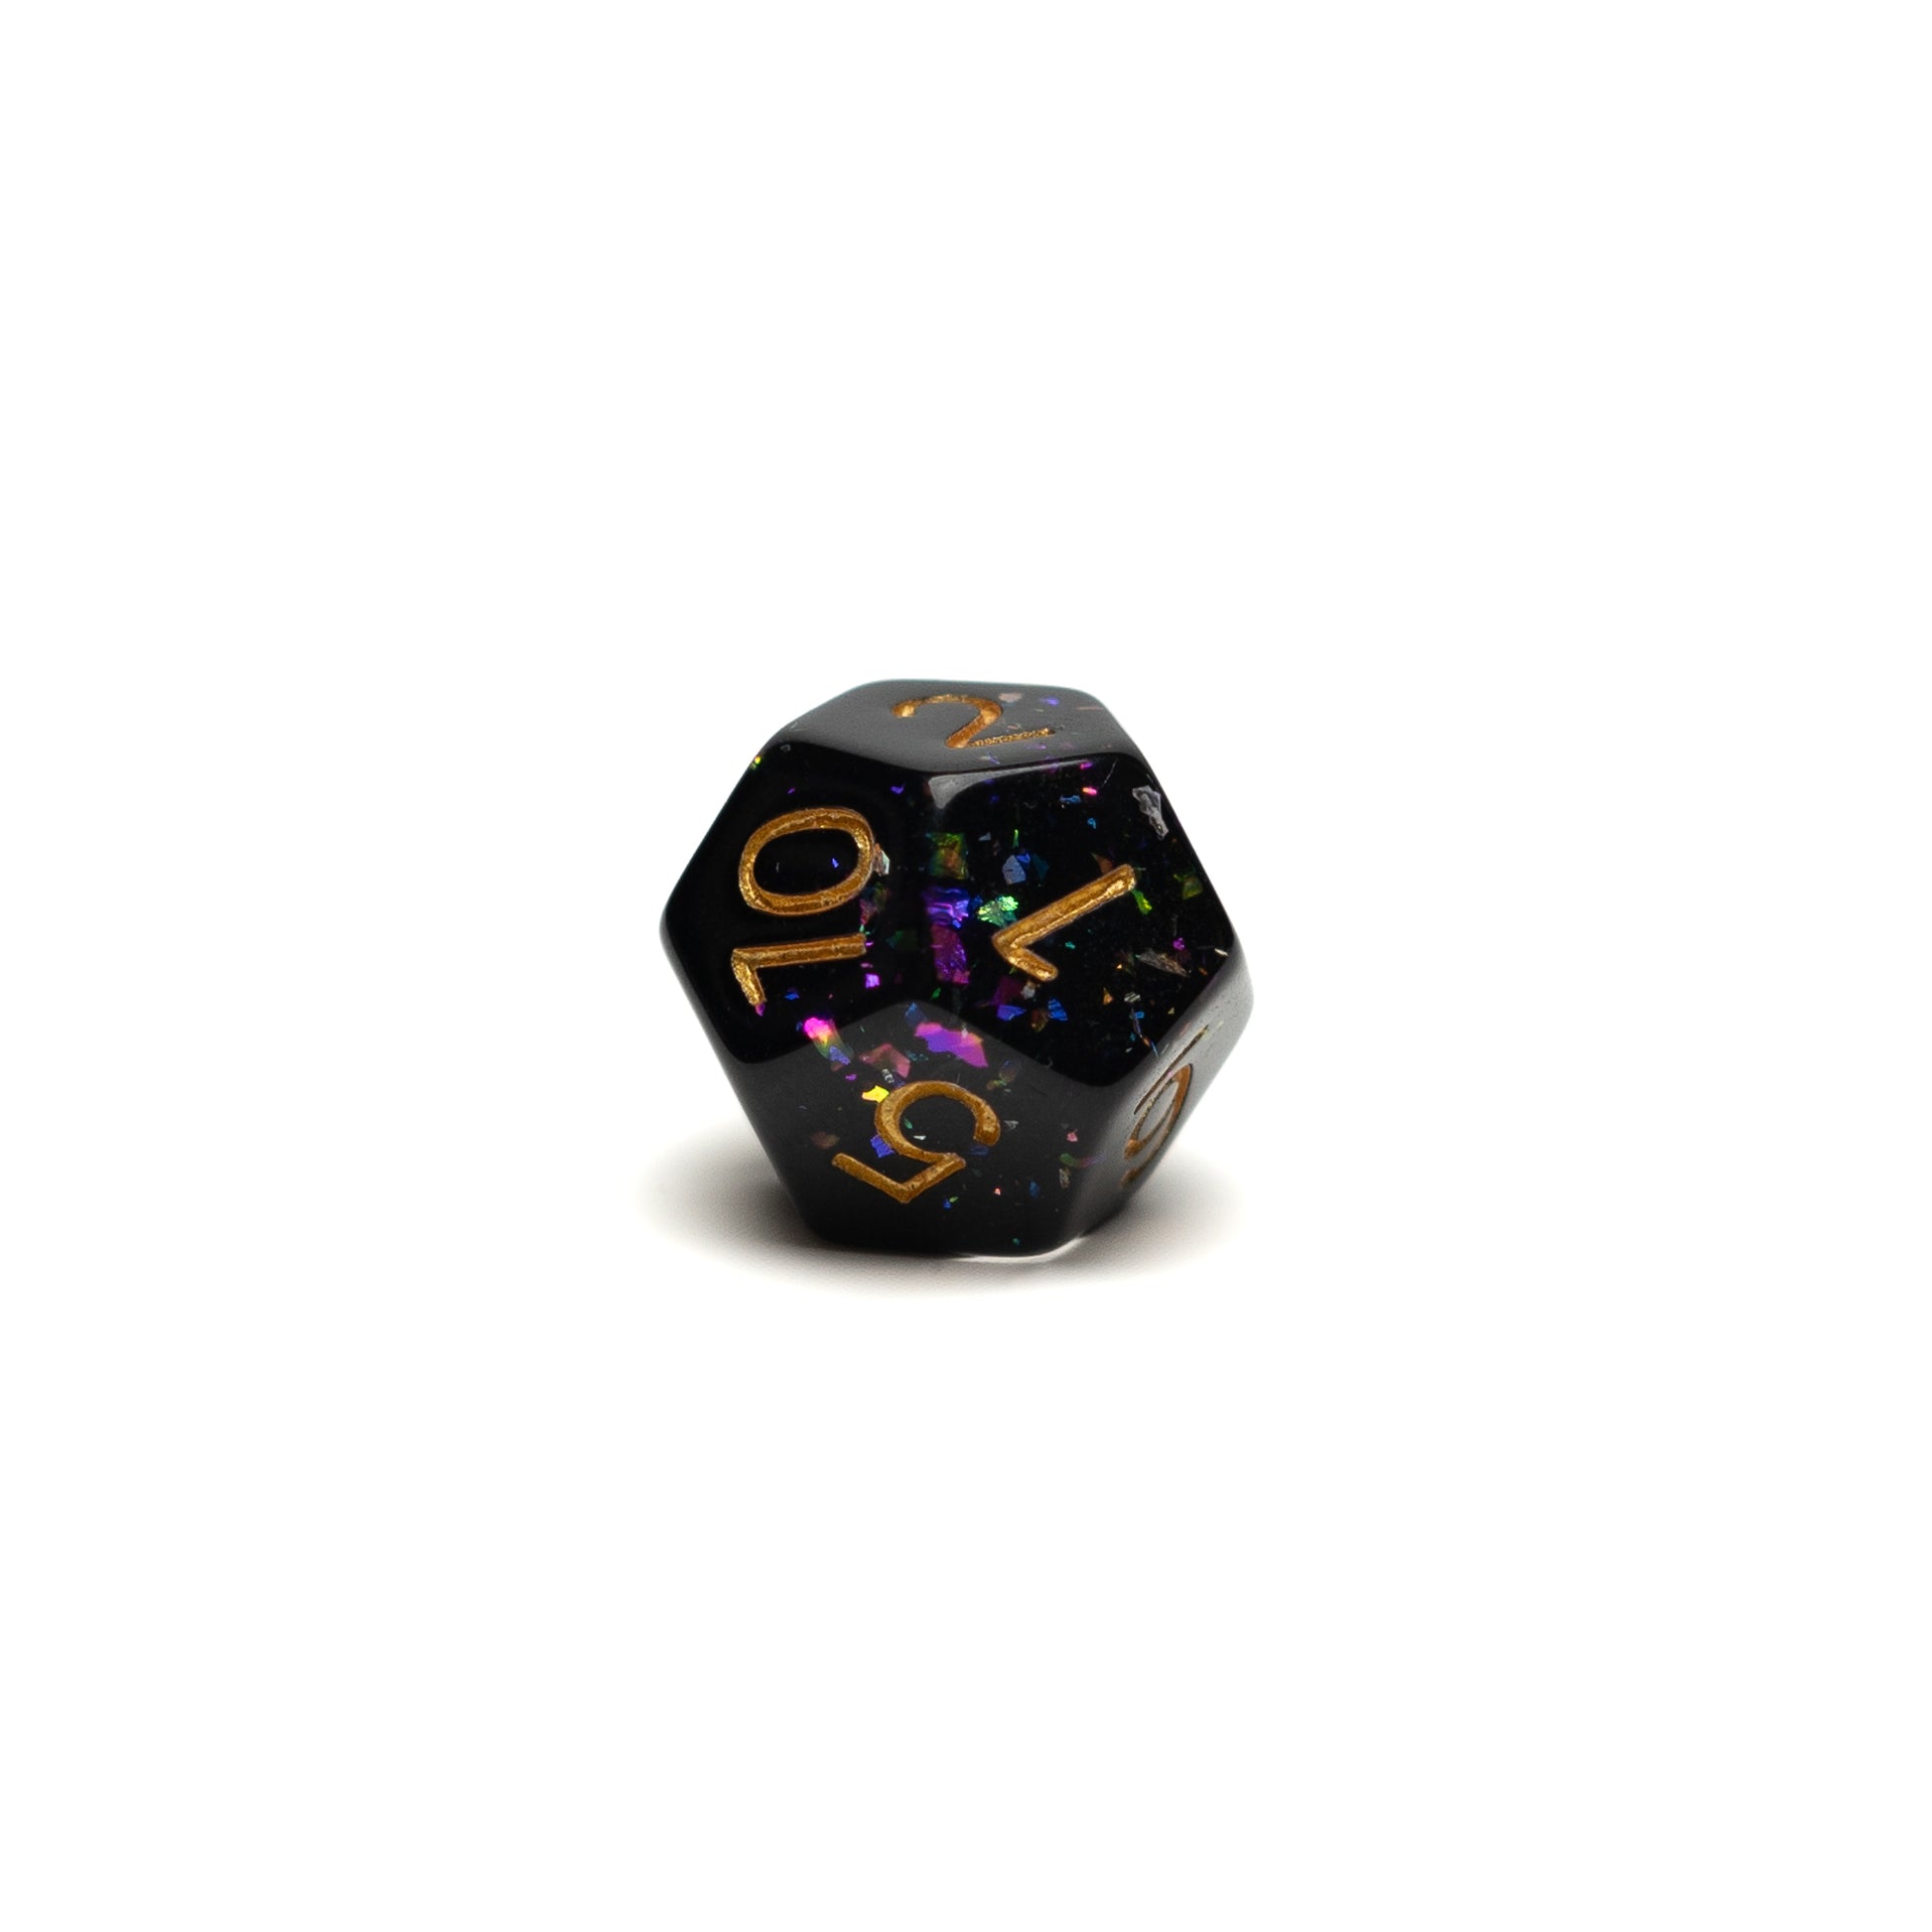 Roll Britannia Derek Normalbeard Dungeons and Dragons D12 Dice with Rainbow Glitter Confetti Aesthetic